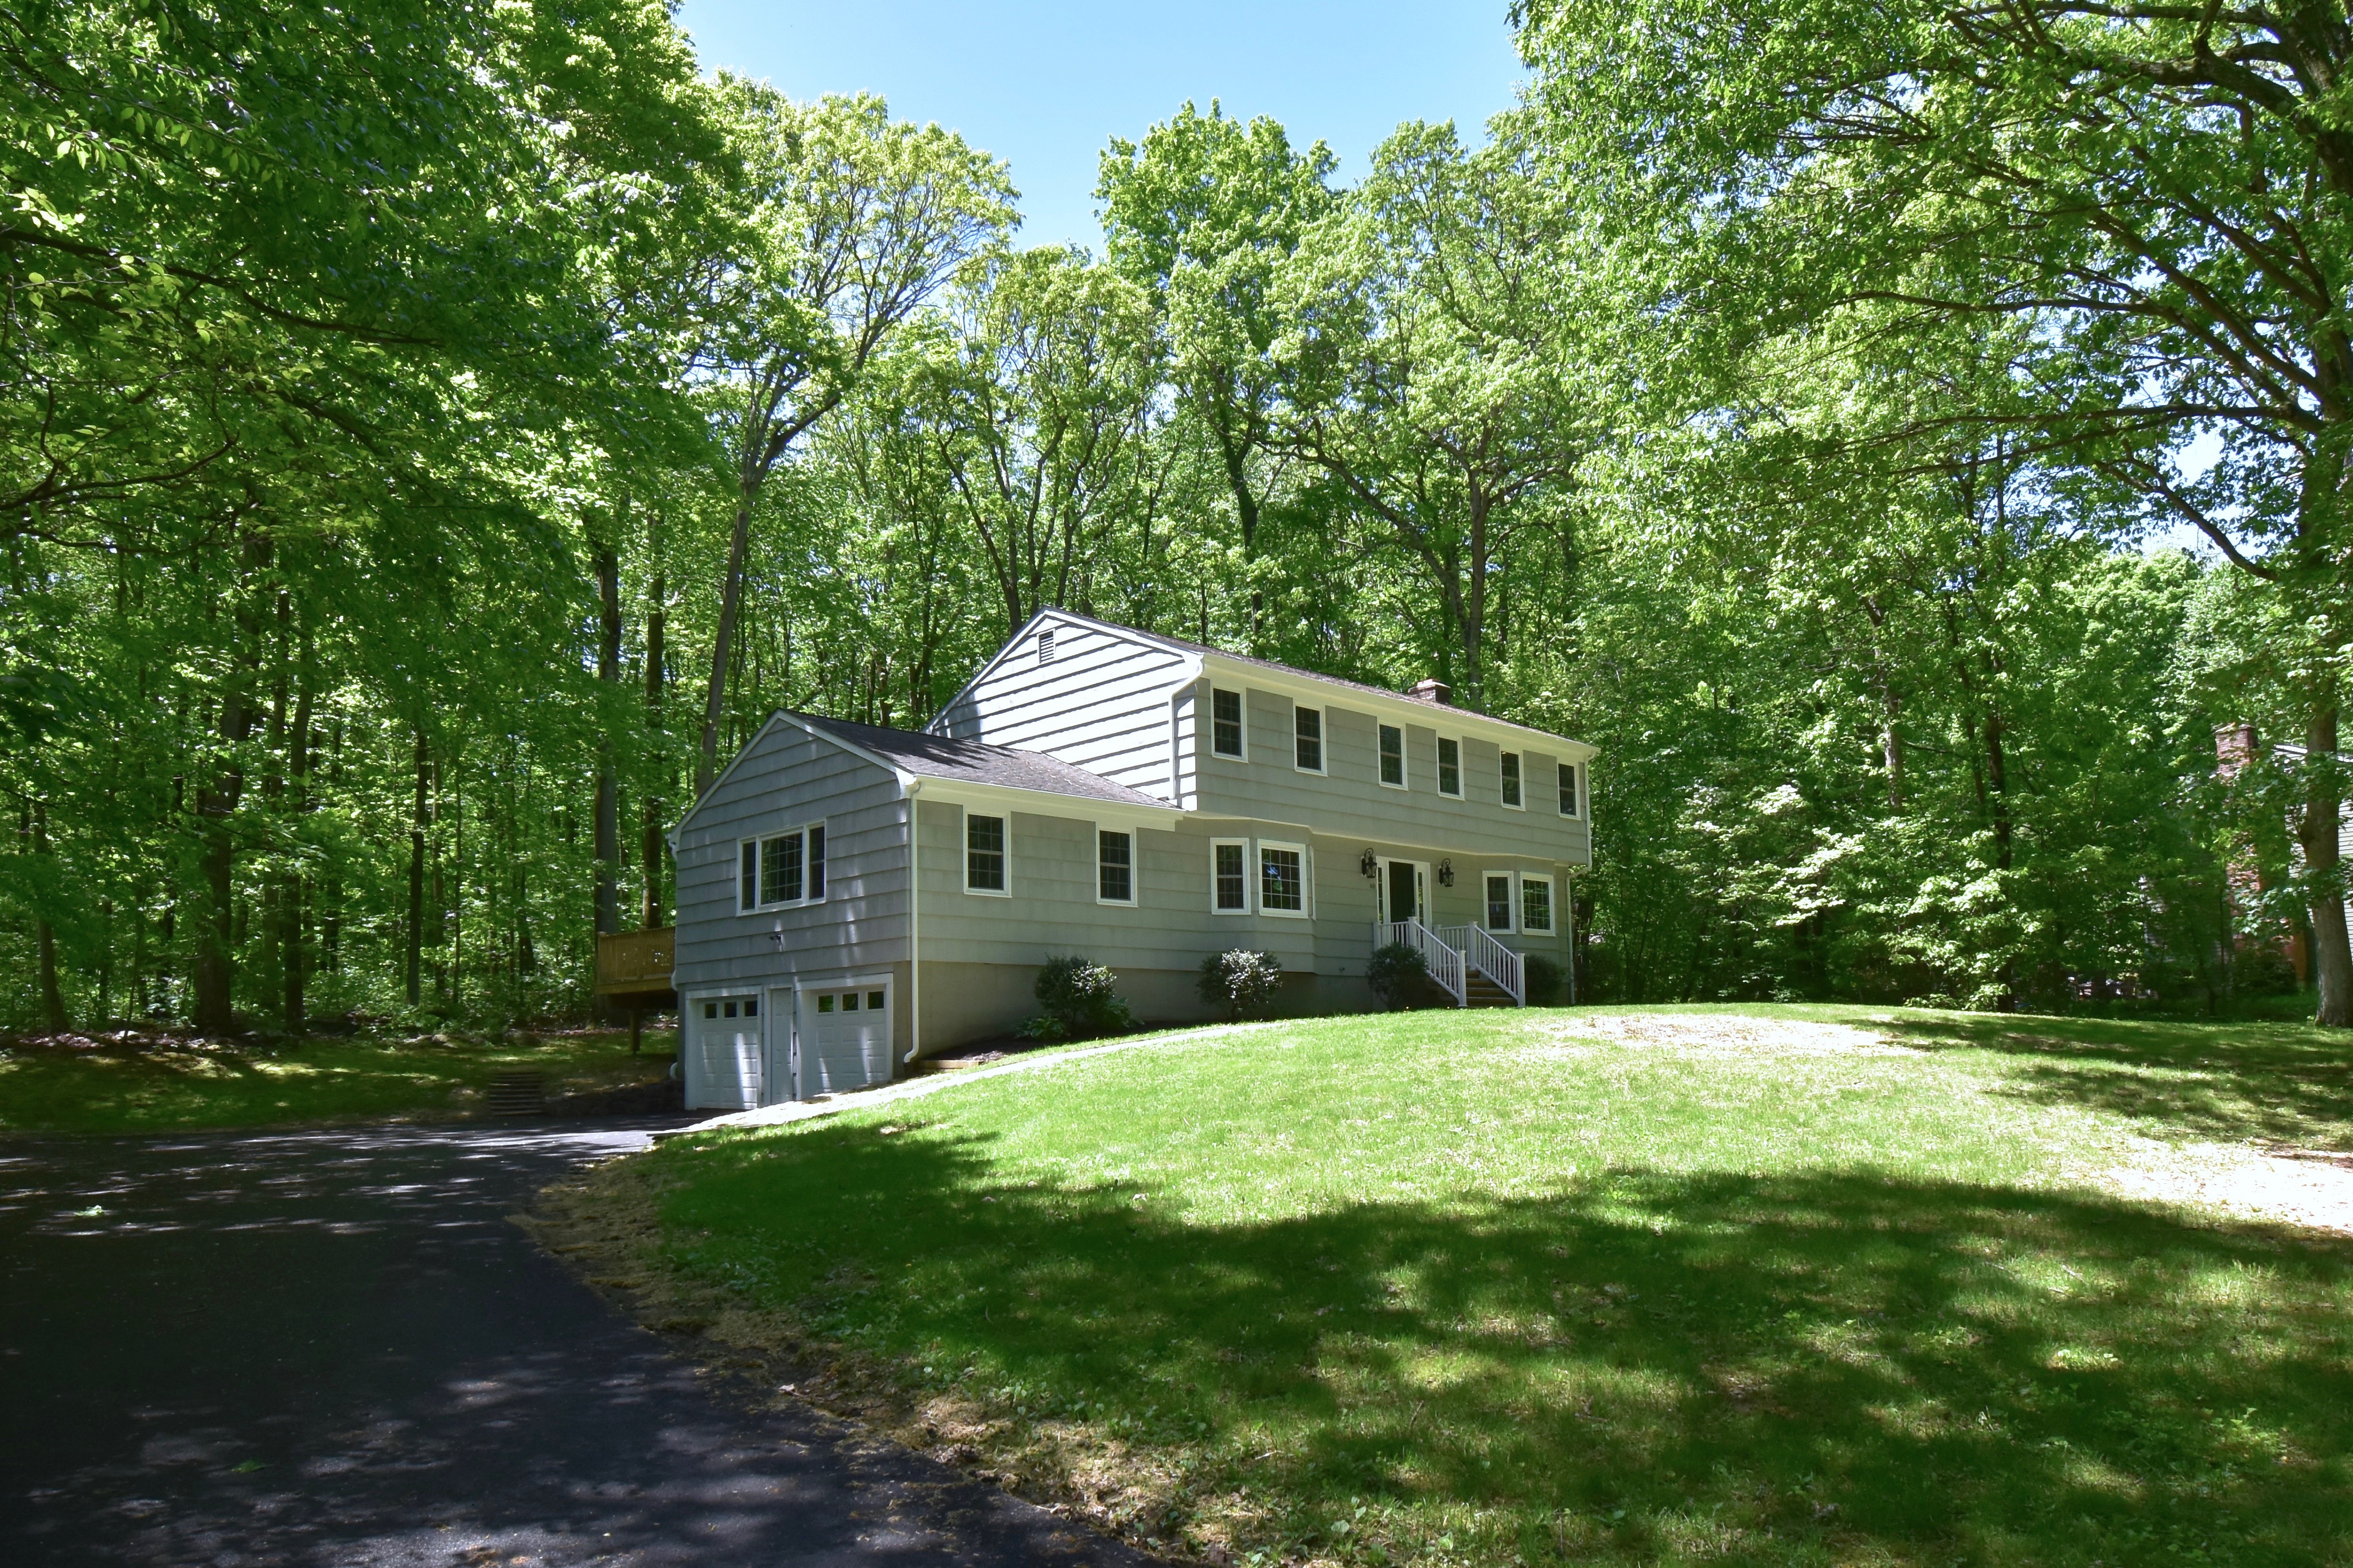 Home for Sale in Sandy Hook CT 06482